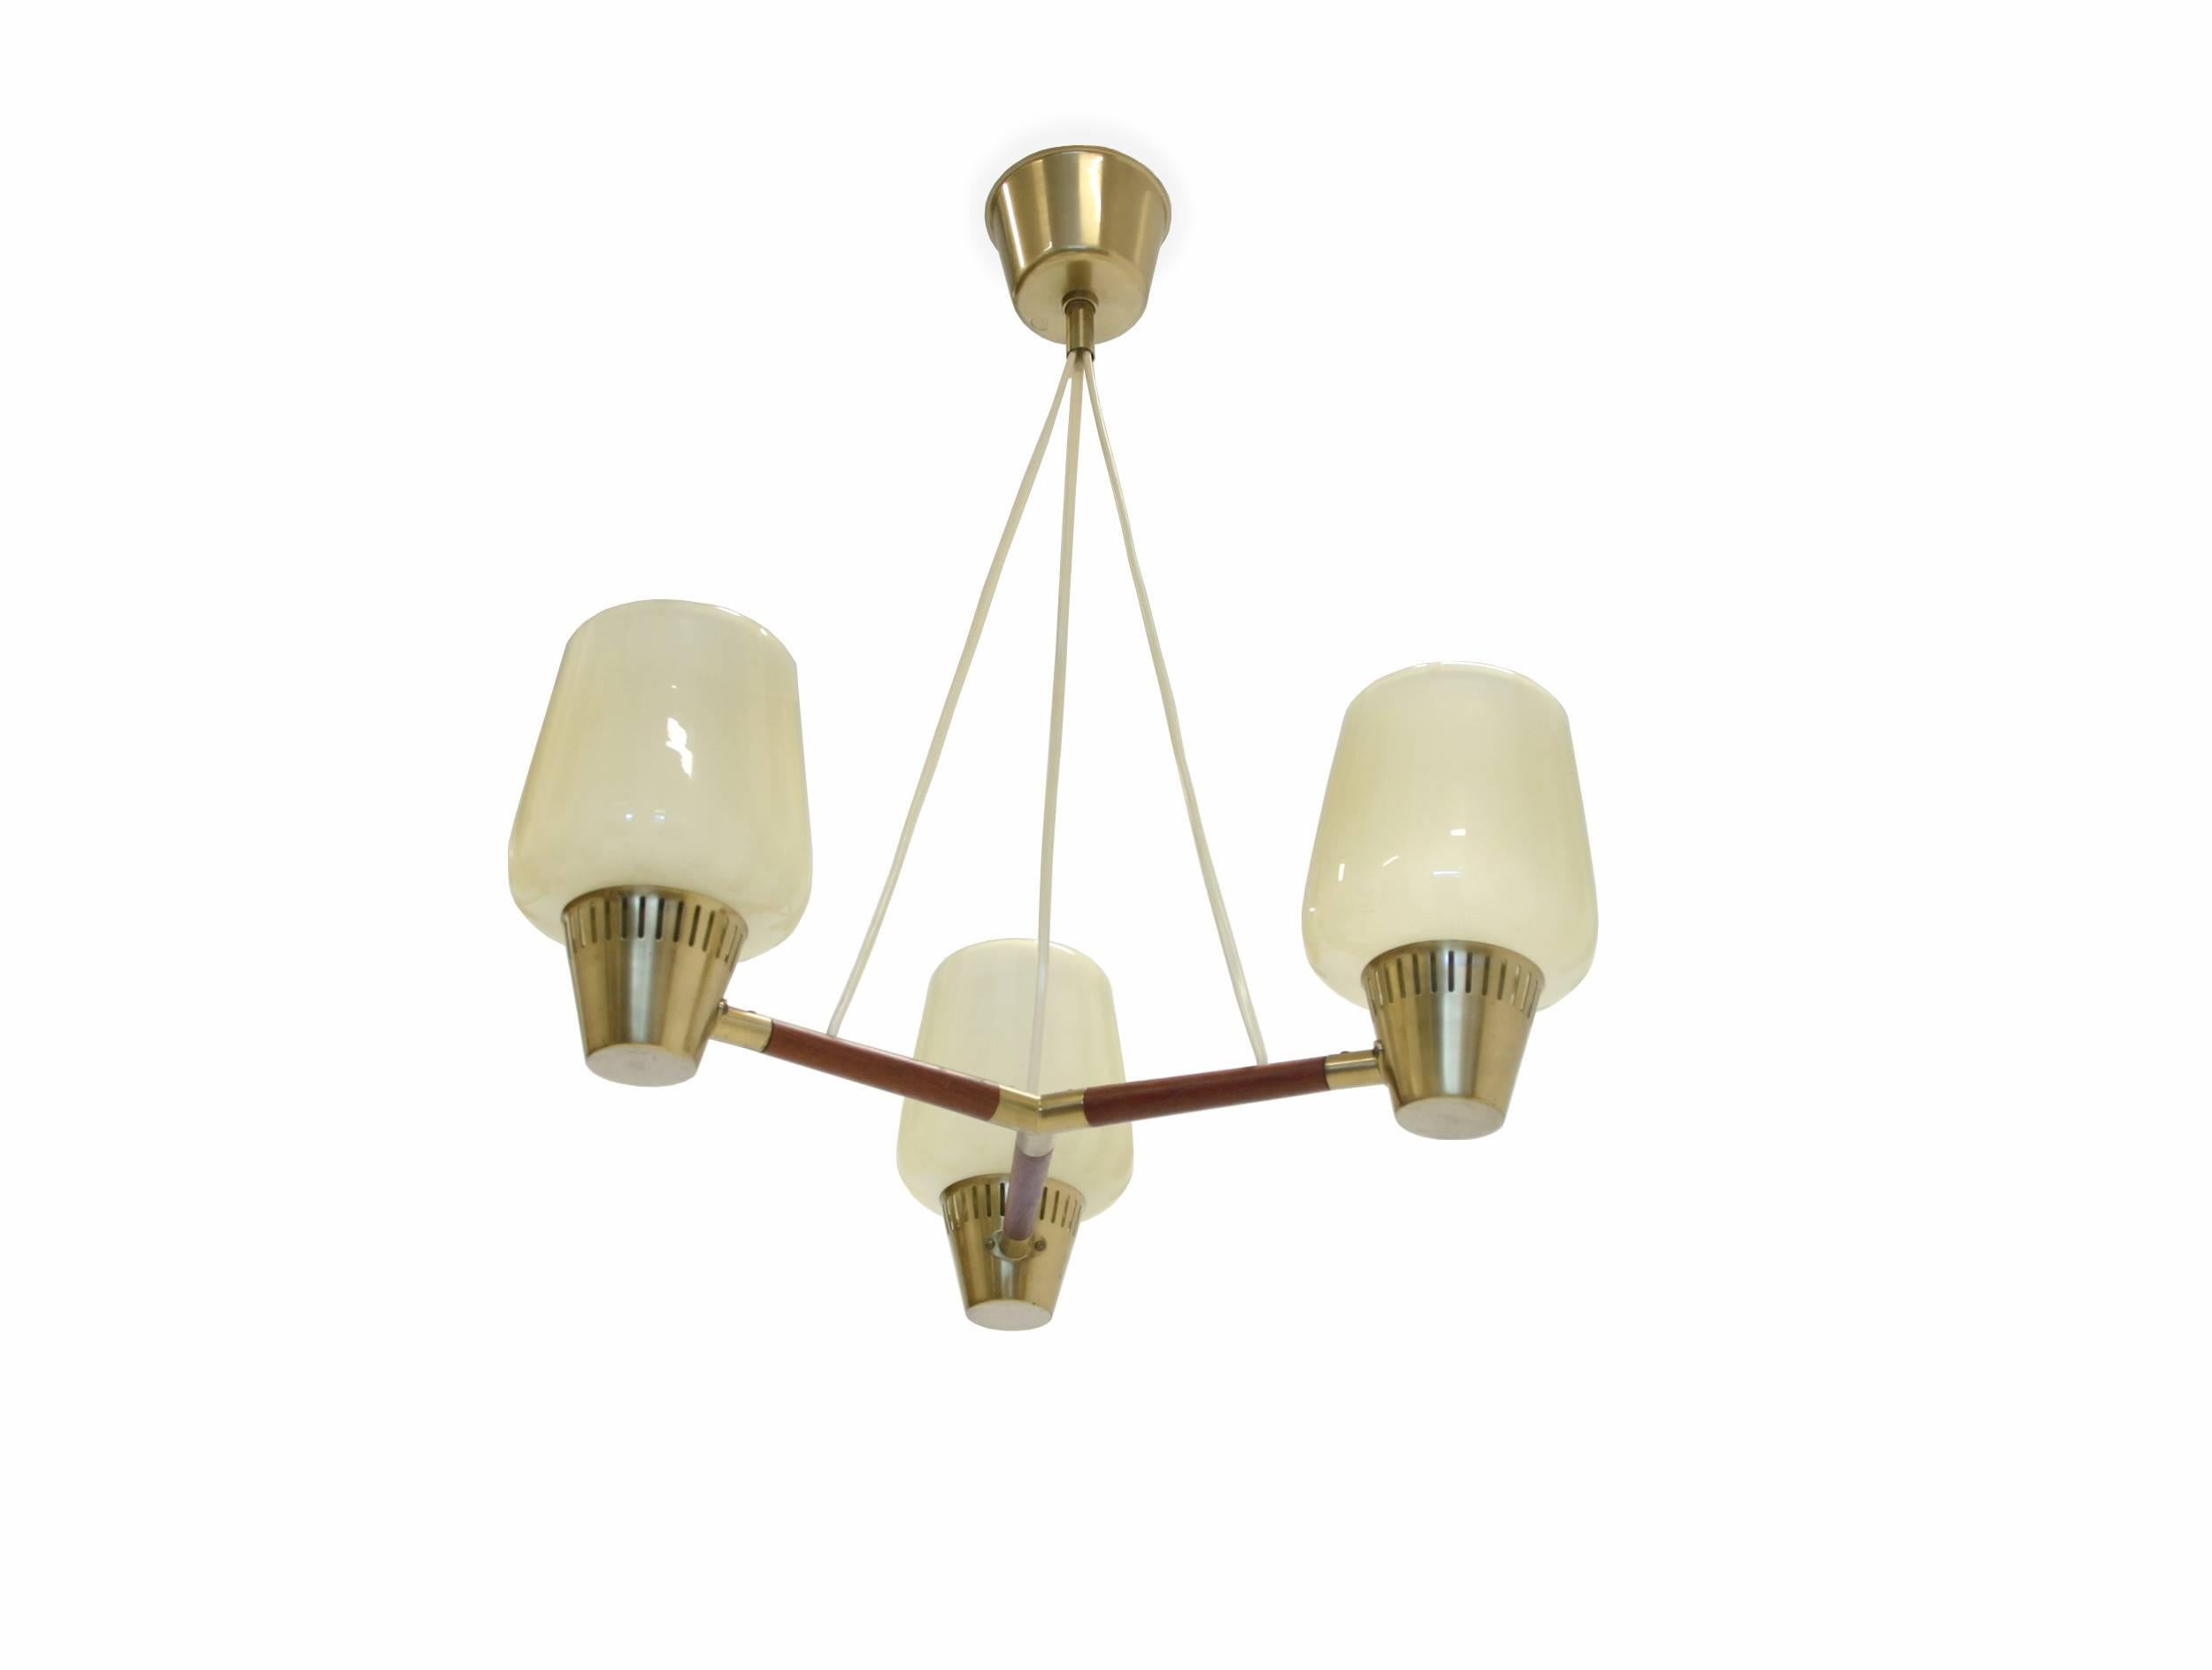 Beautiful and rare three-armed ceiling light on a teak frame and cupolas in frosted glass.

Designed and made in Sweden by ASEA, circa 1960s second half.

The lamp is fully working and in excellent vintage condition.

Complimentary world wide